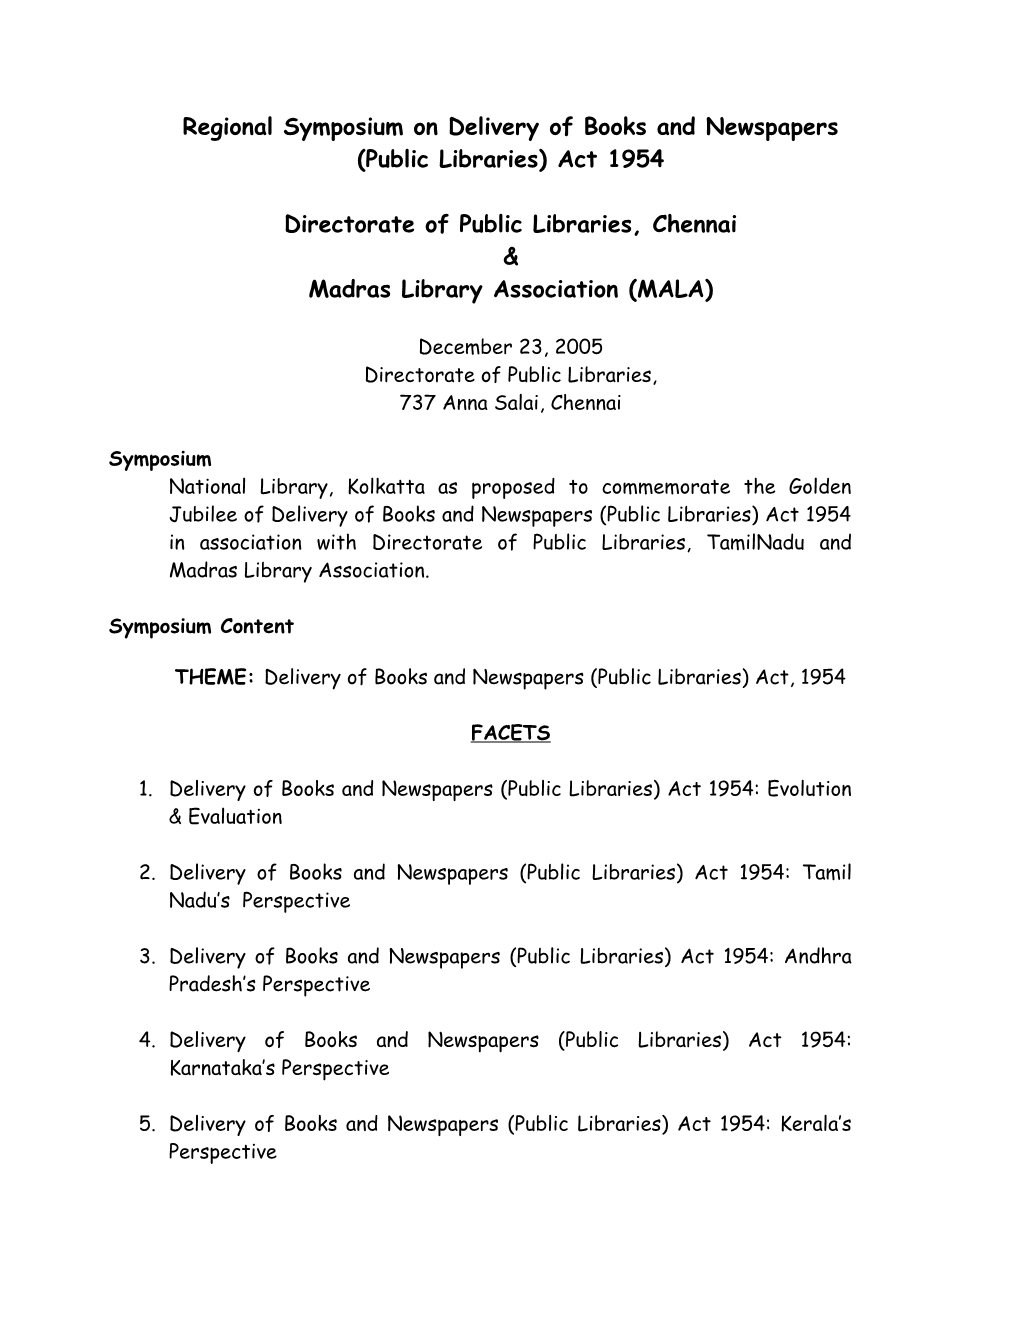 Regional Seminar on Delivery of Books and Newspapers (Public Libraries) Act 1954